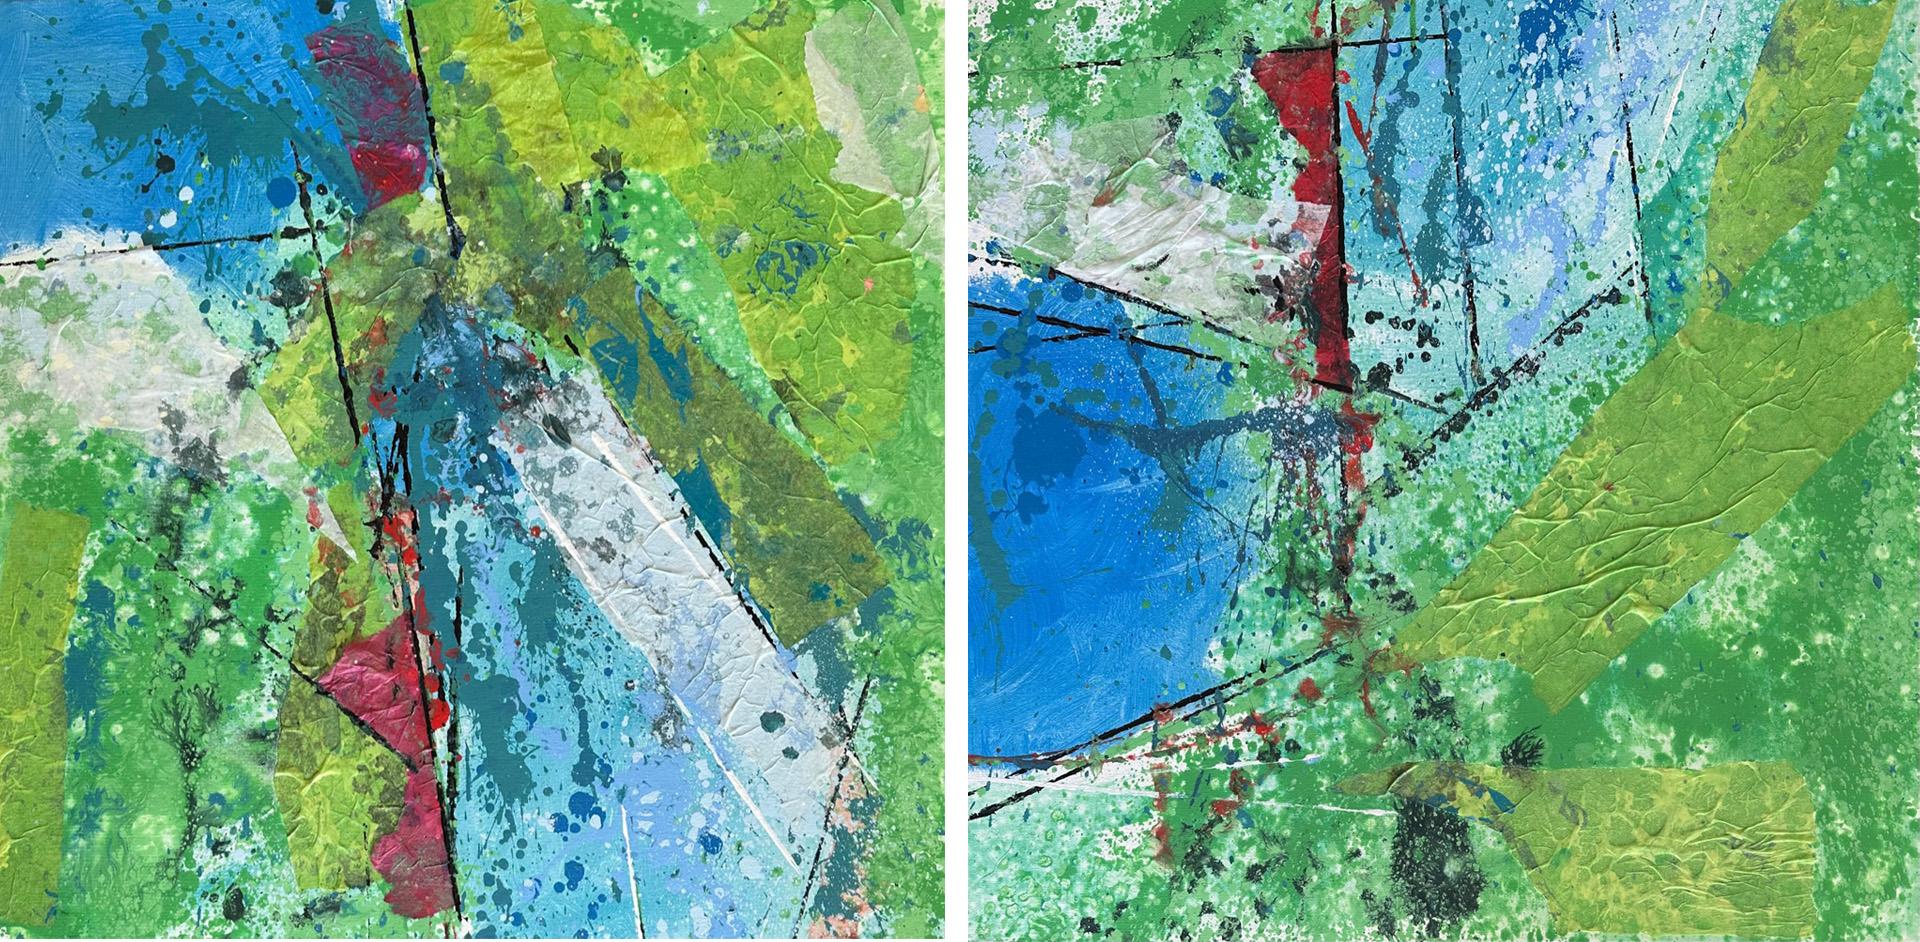 Lost In Space ( Diptych ) - Oya Bolgun - Abstract Painting - Mixed Media